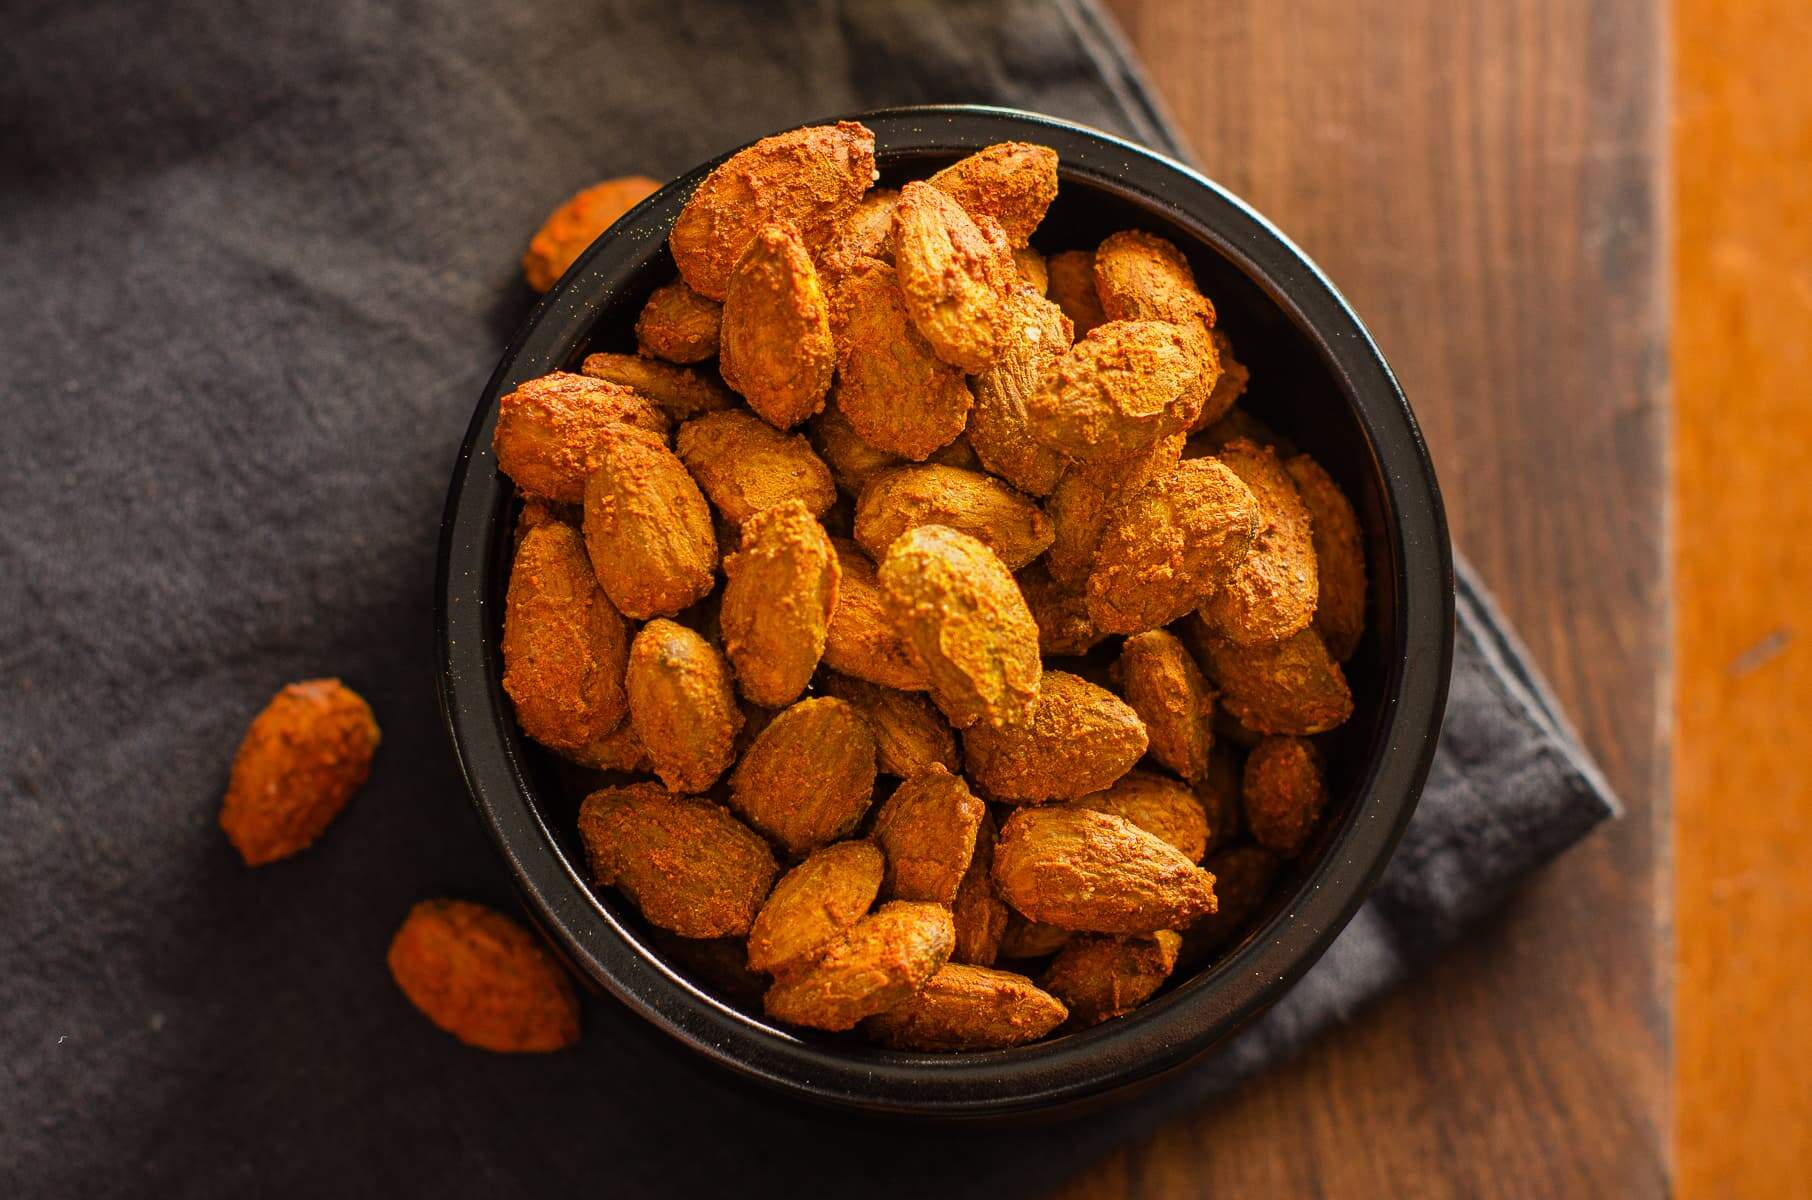 Almonds baked in a spicy coating and served in a black bowl.